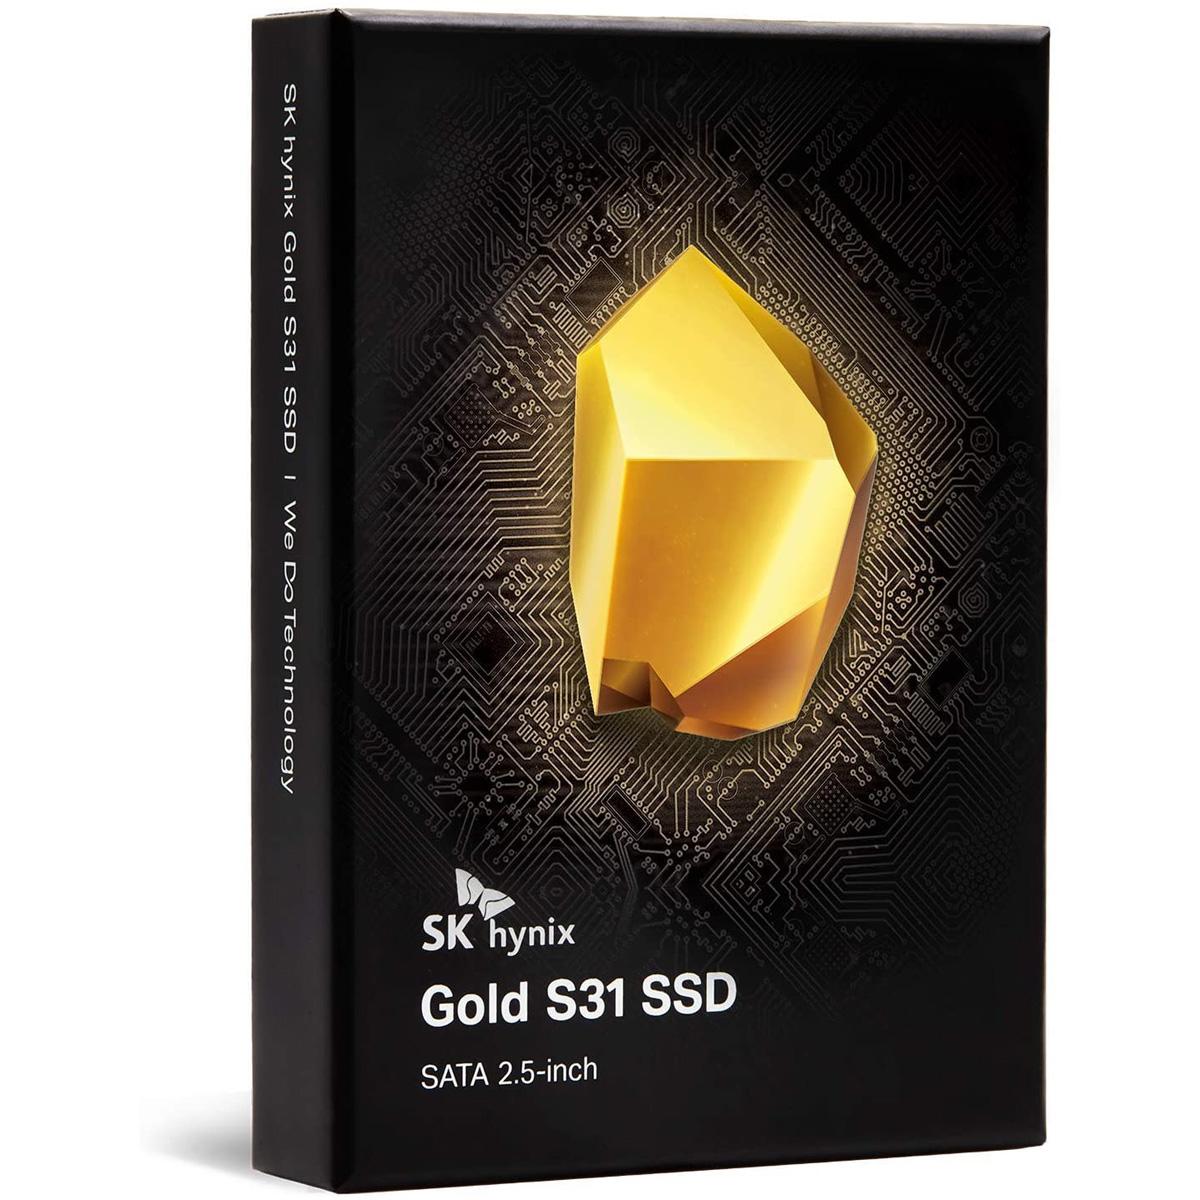 1TB SK hynix Gold S31 3D NAND SSD for $83.99 shipped